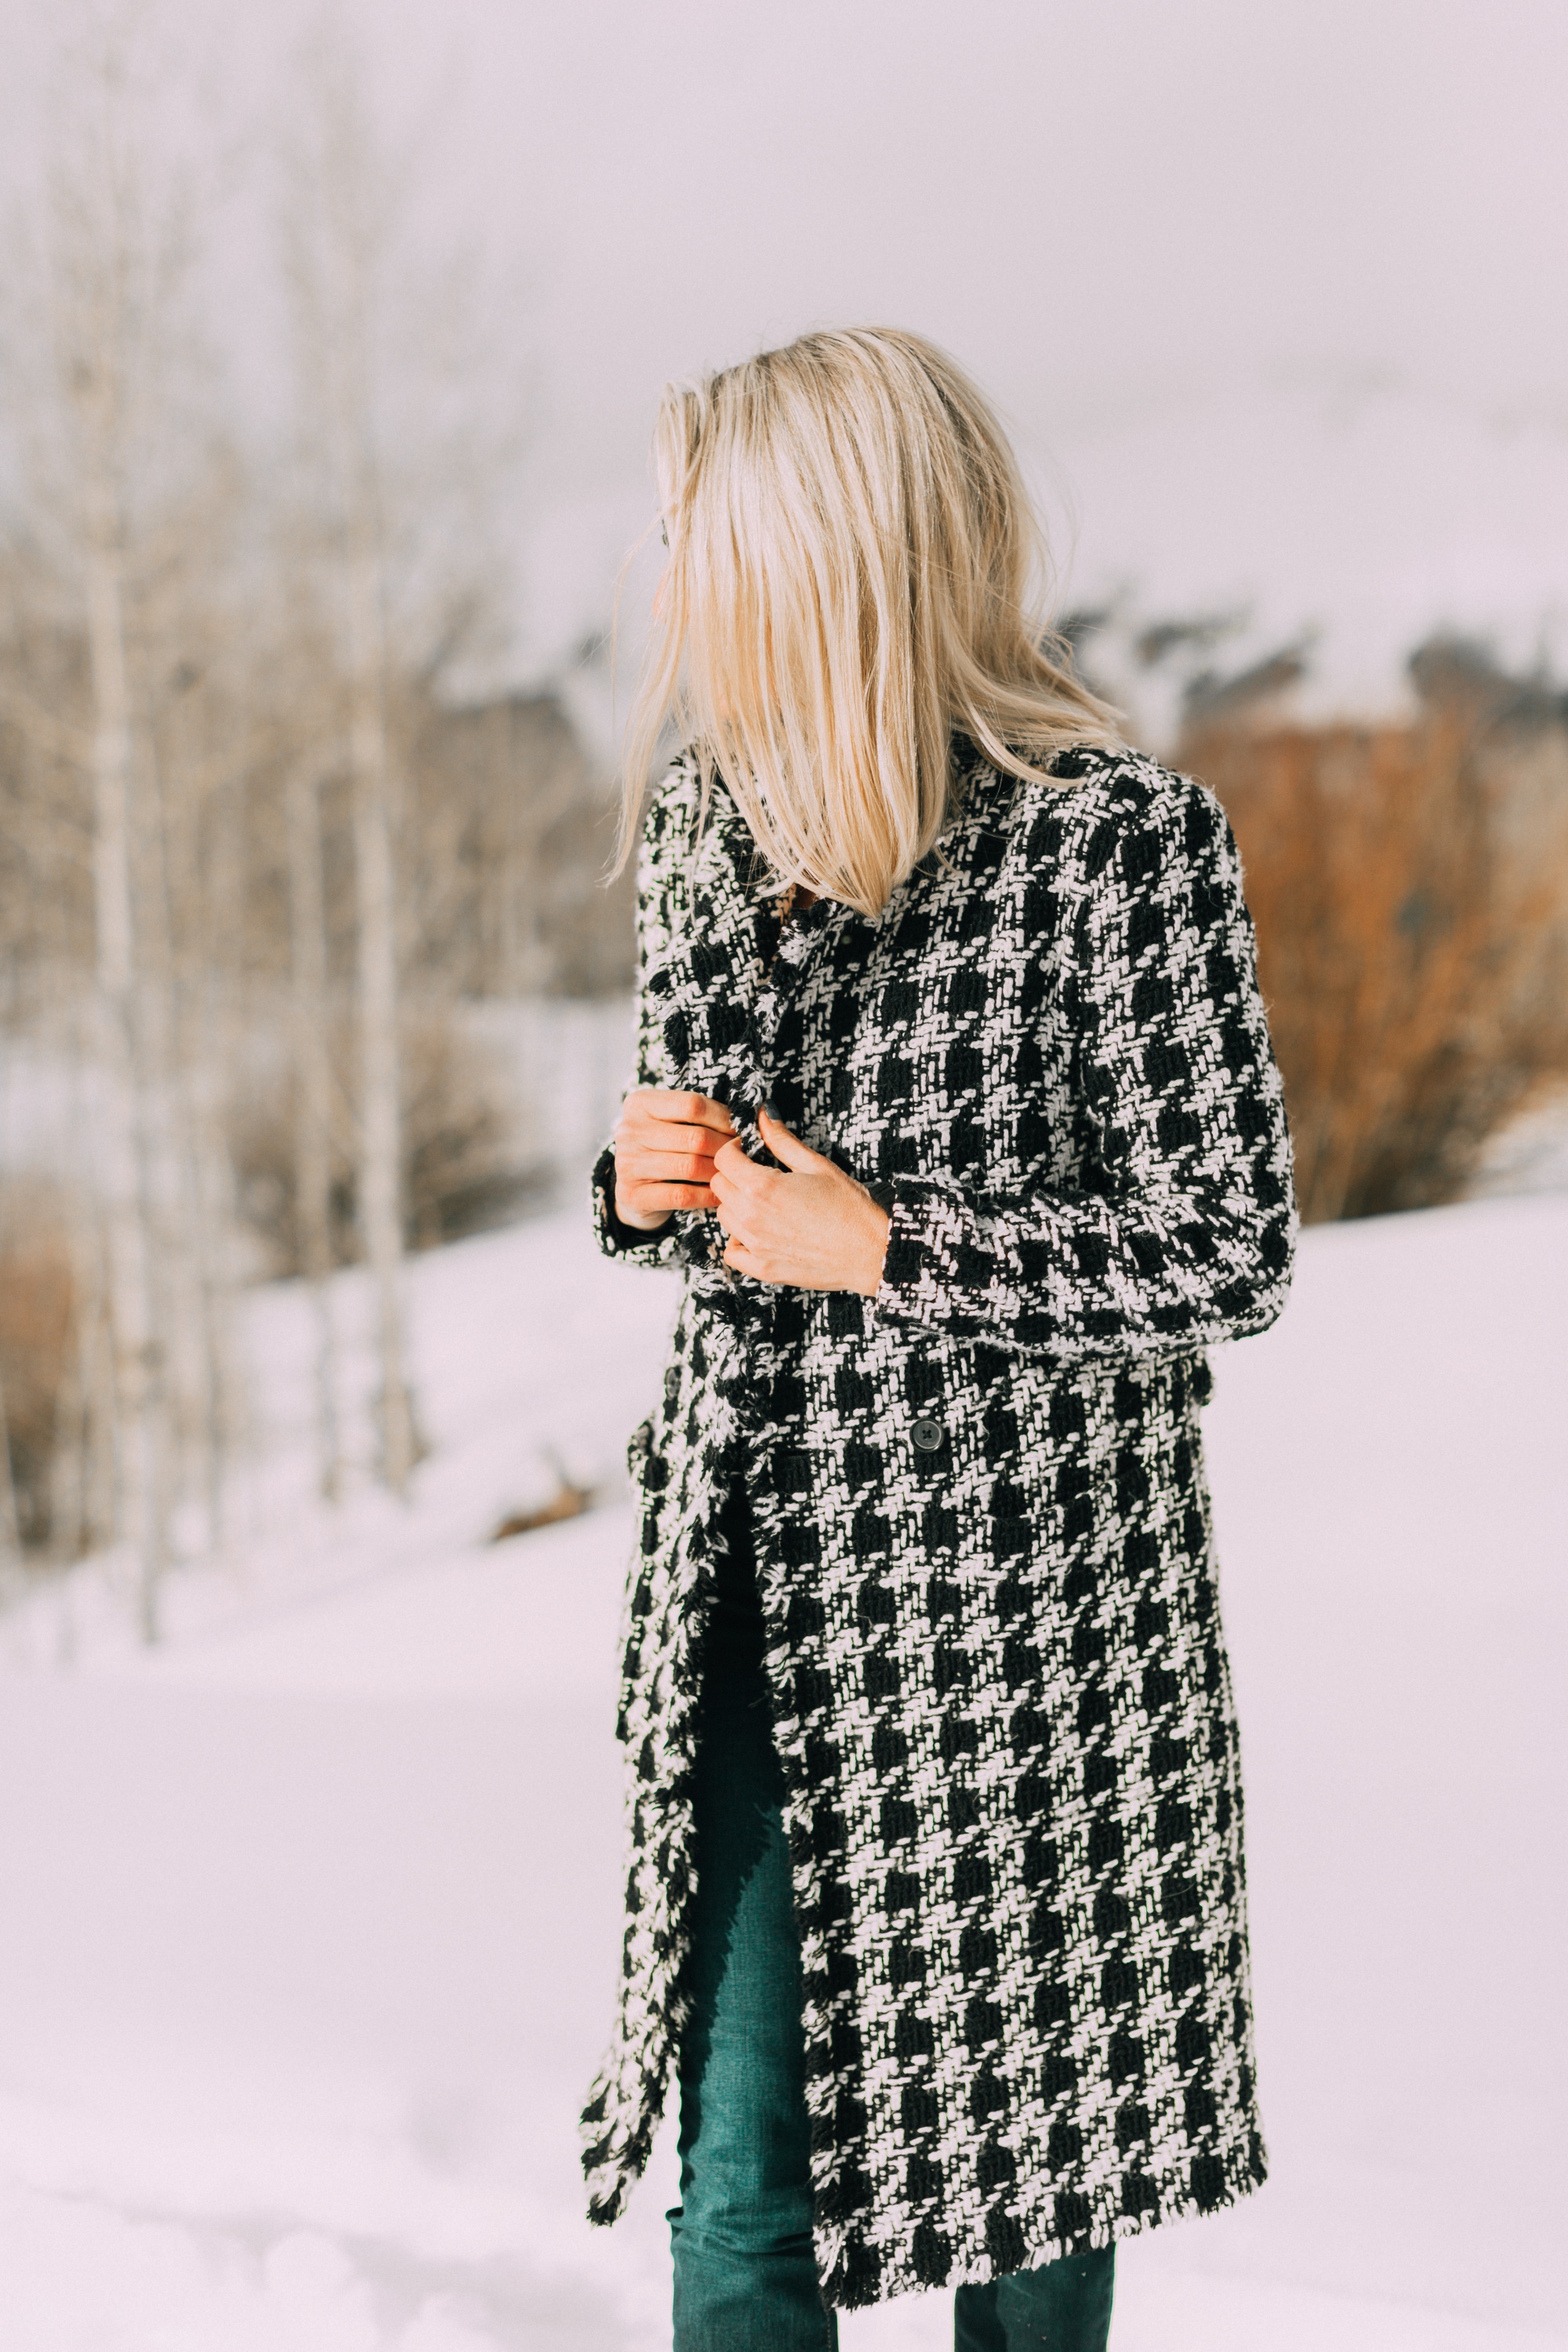 Houndstooth Clothing, how to wear this bold and classic print featuring a Joie houndstooth coat with black jeans and black camisole.